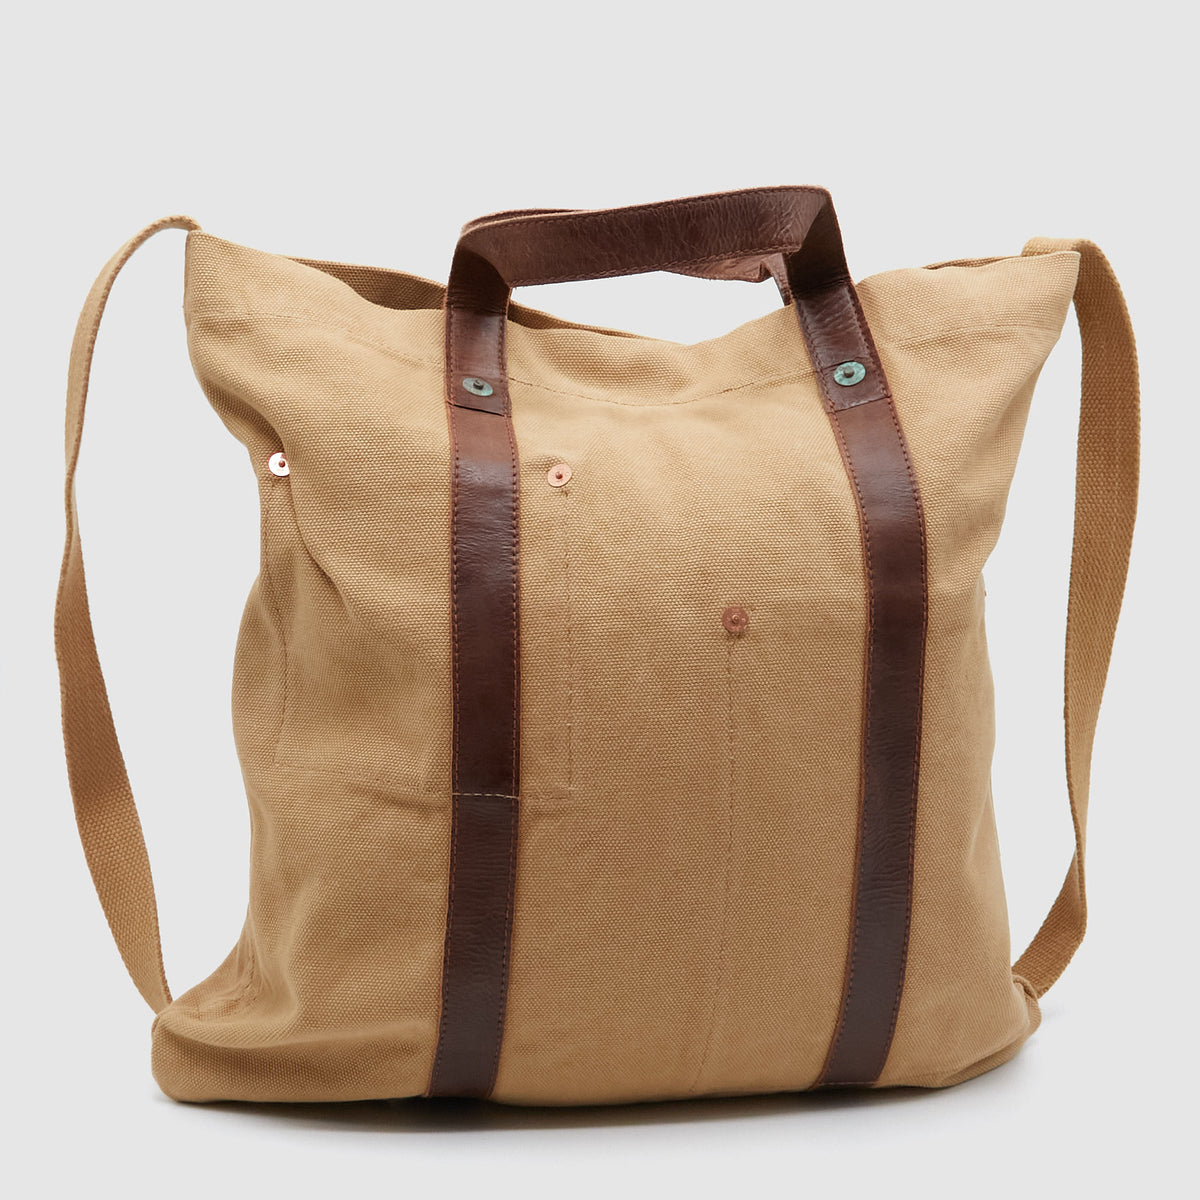 Double RL Leather-Trim Canvas Tote Bag